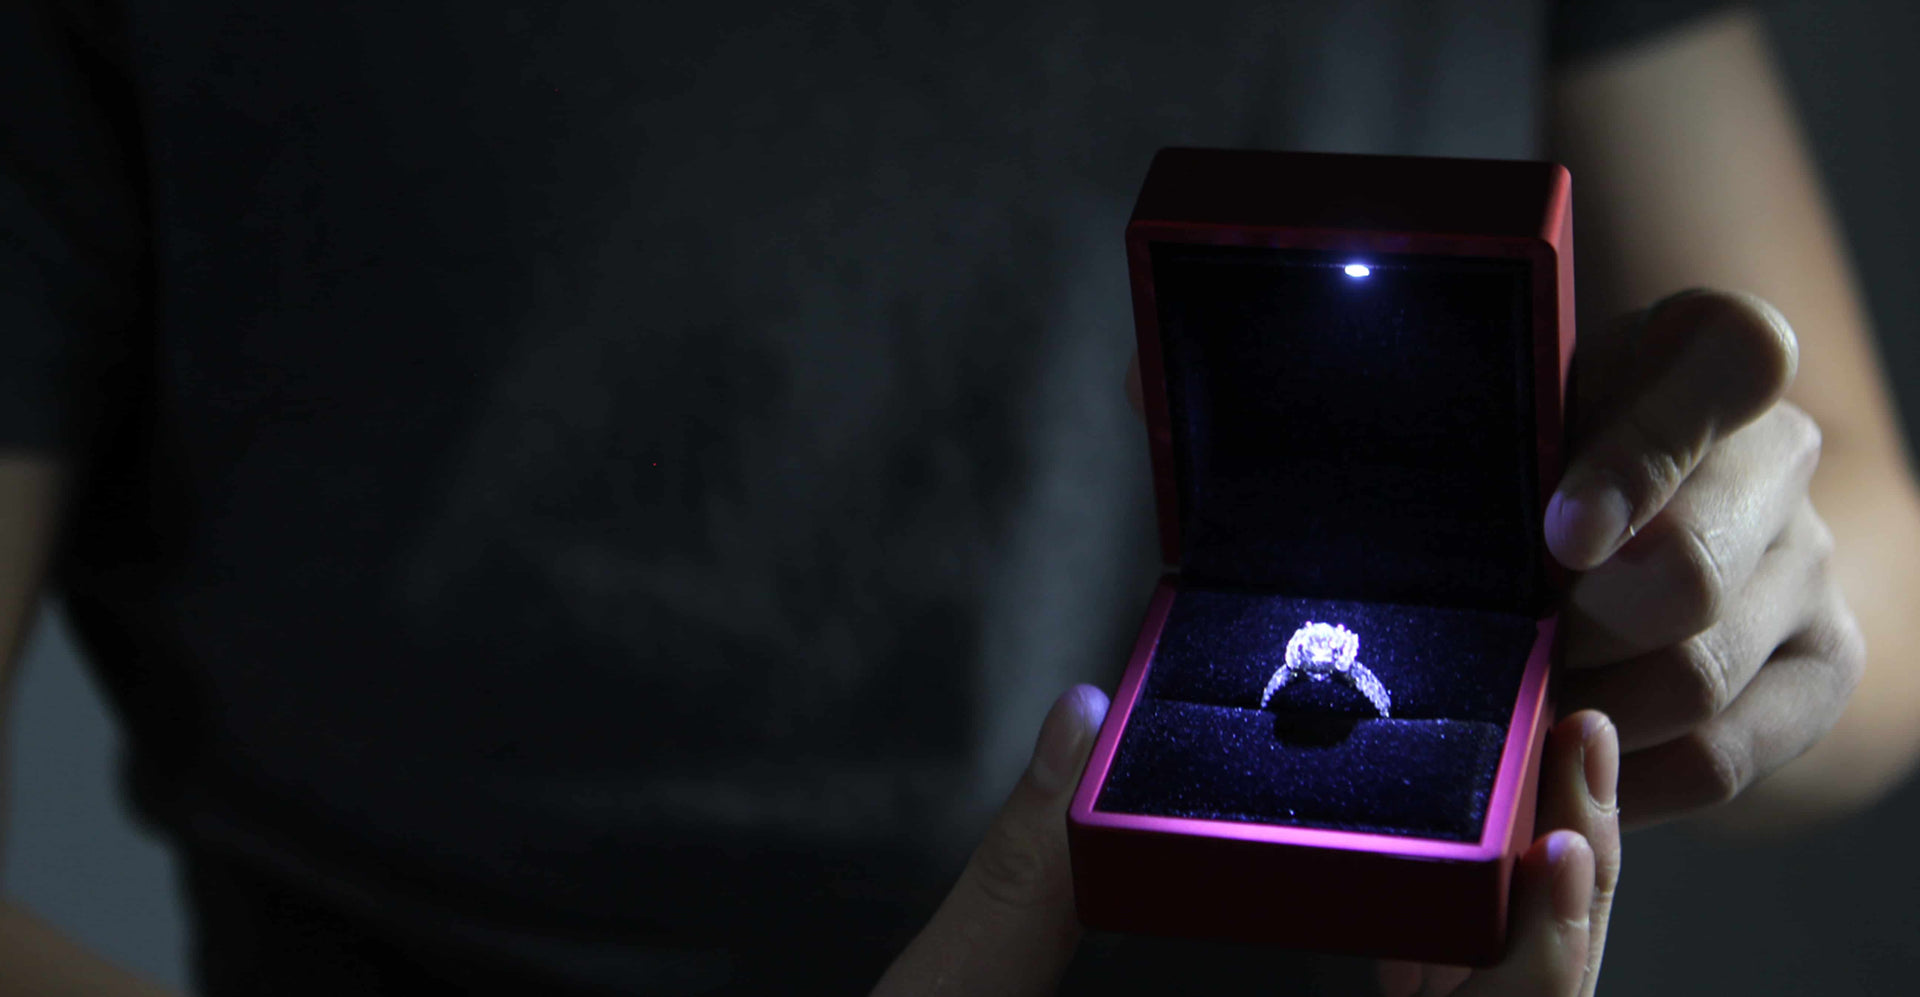 Unique Proposal Ring box, Red Engagement Ring box, Ring box with lighting, Ring box with LED light, Proposal in the dark ideas, Night proposals, ring box for nighttime